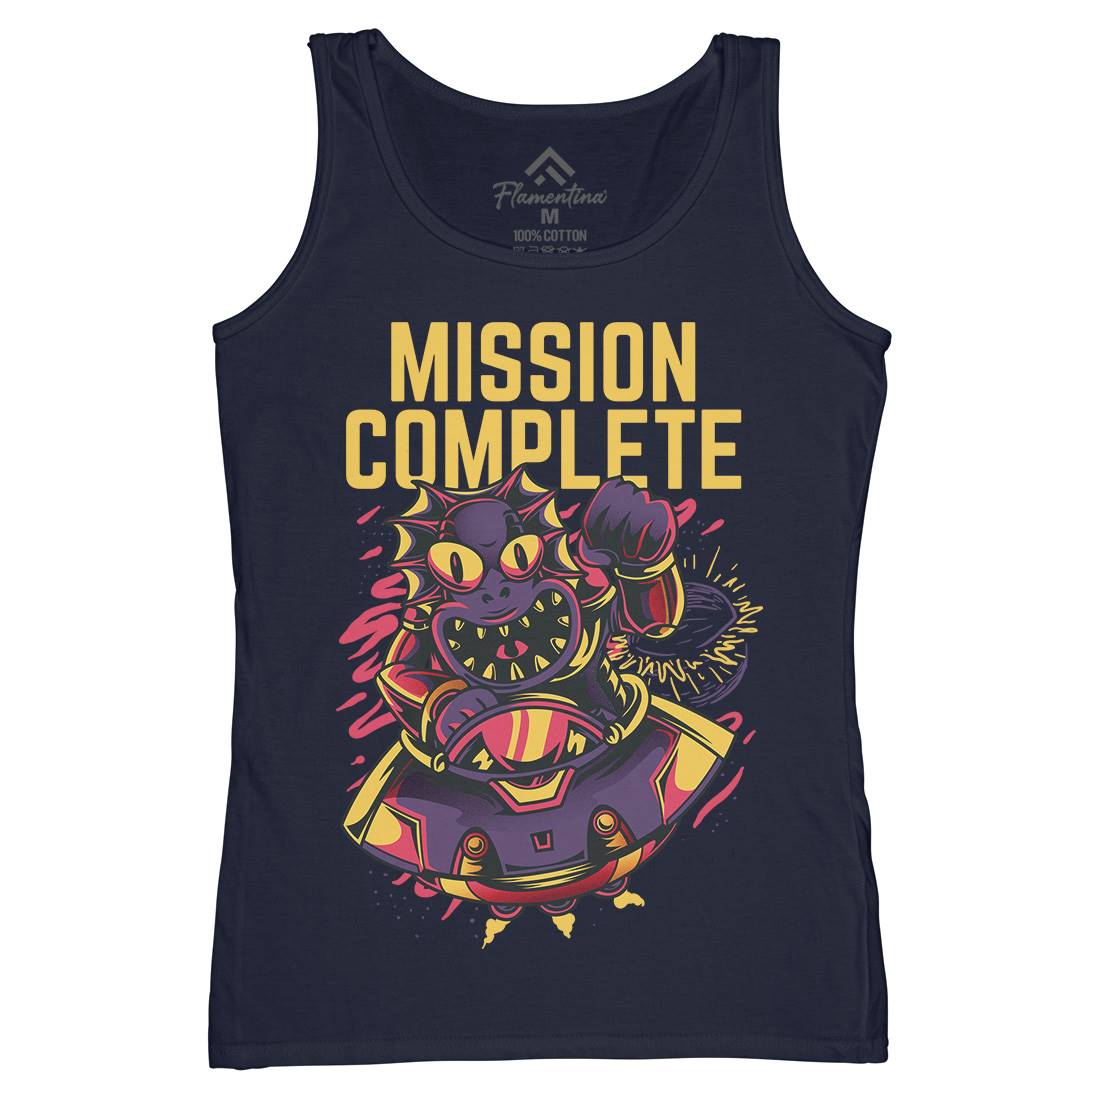 Mission Complete Womens Organic Tank Top Vest Space D655